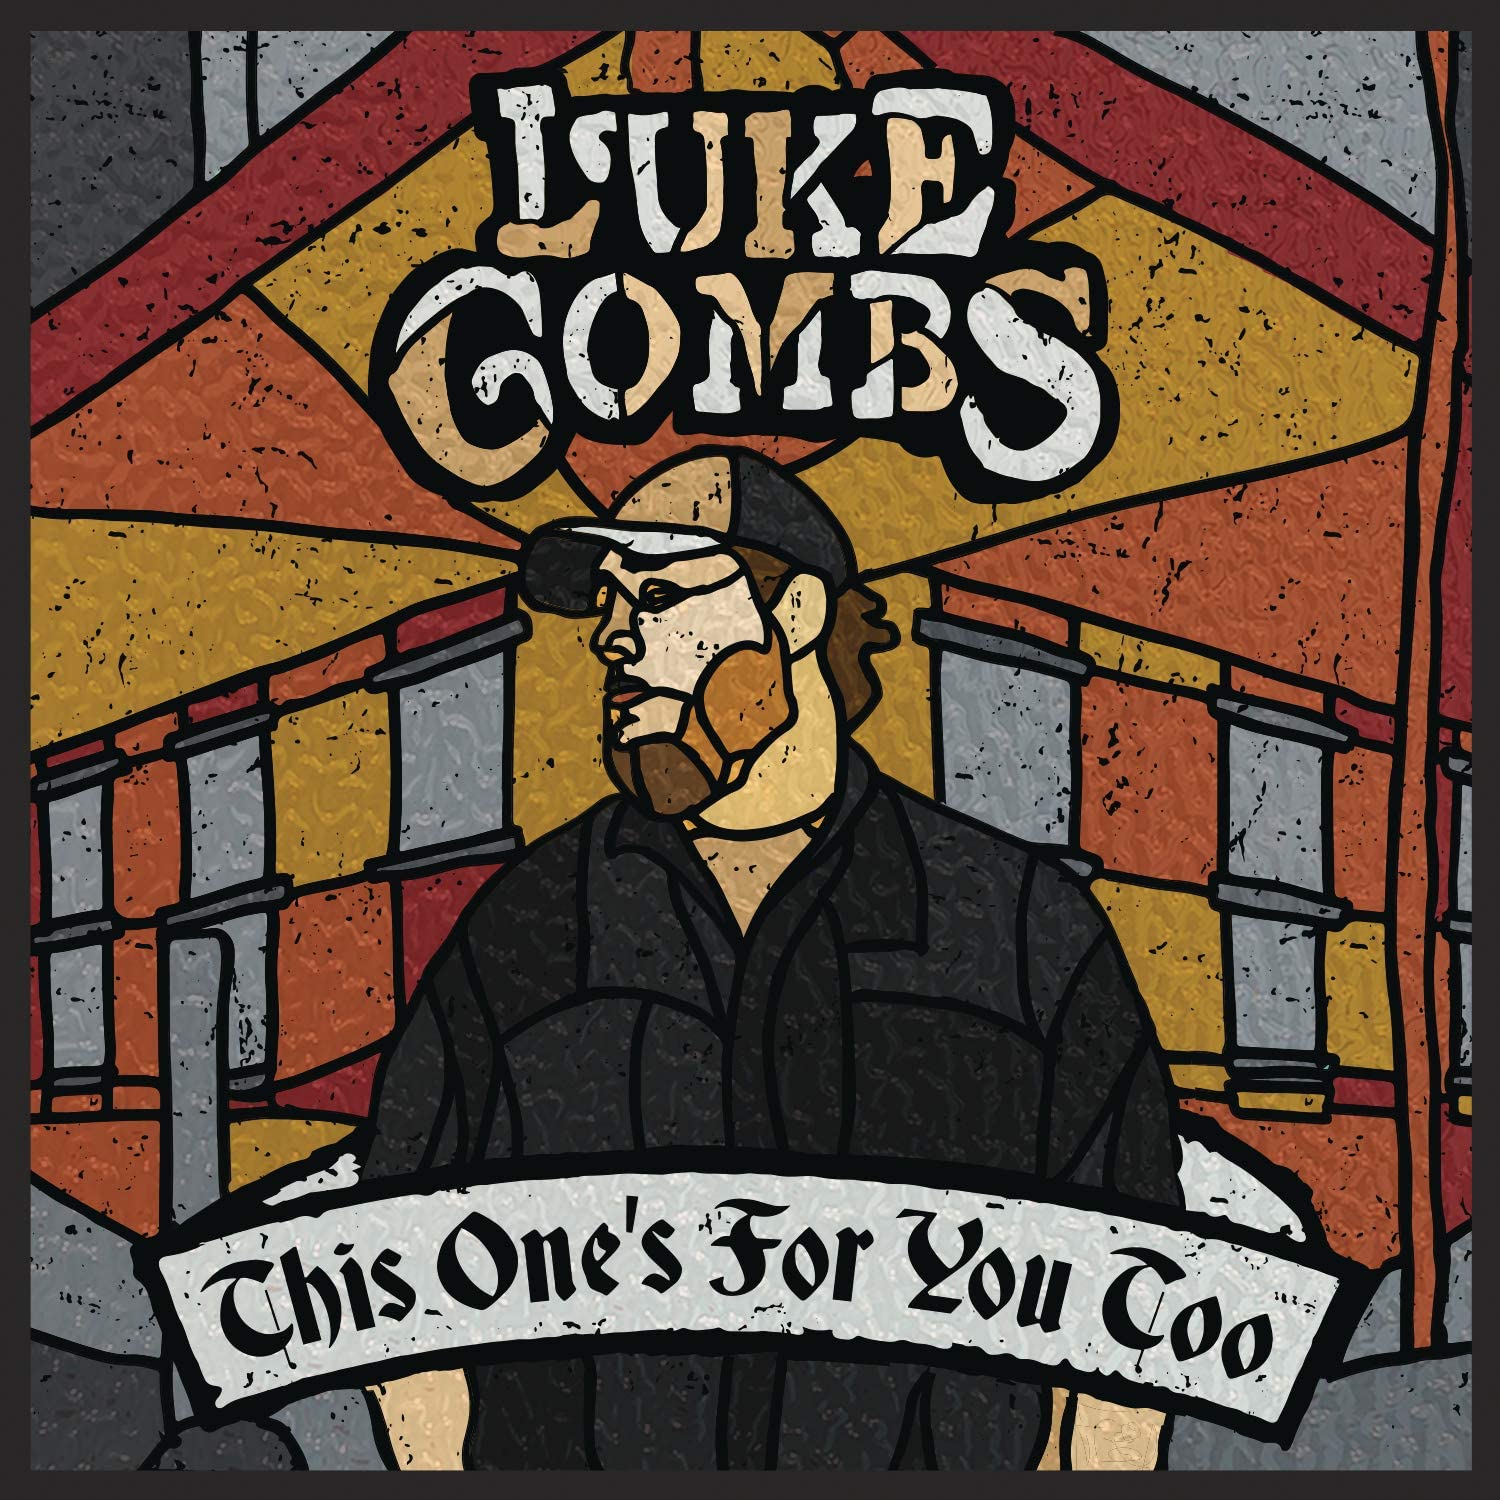 Luke Combs - This One's For You Too (Vinyl 2LP)